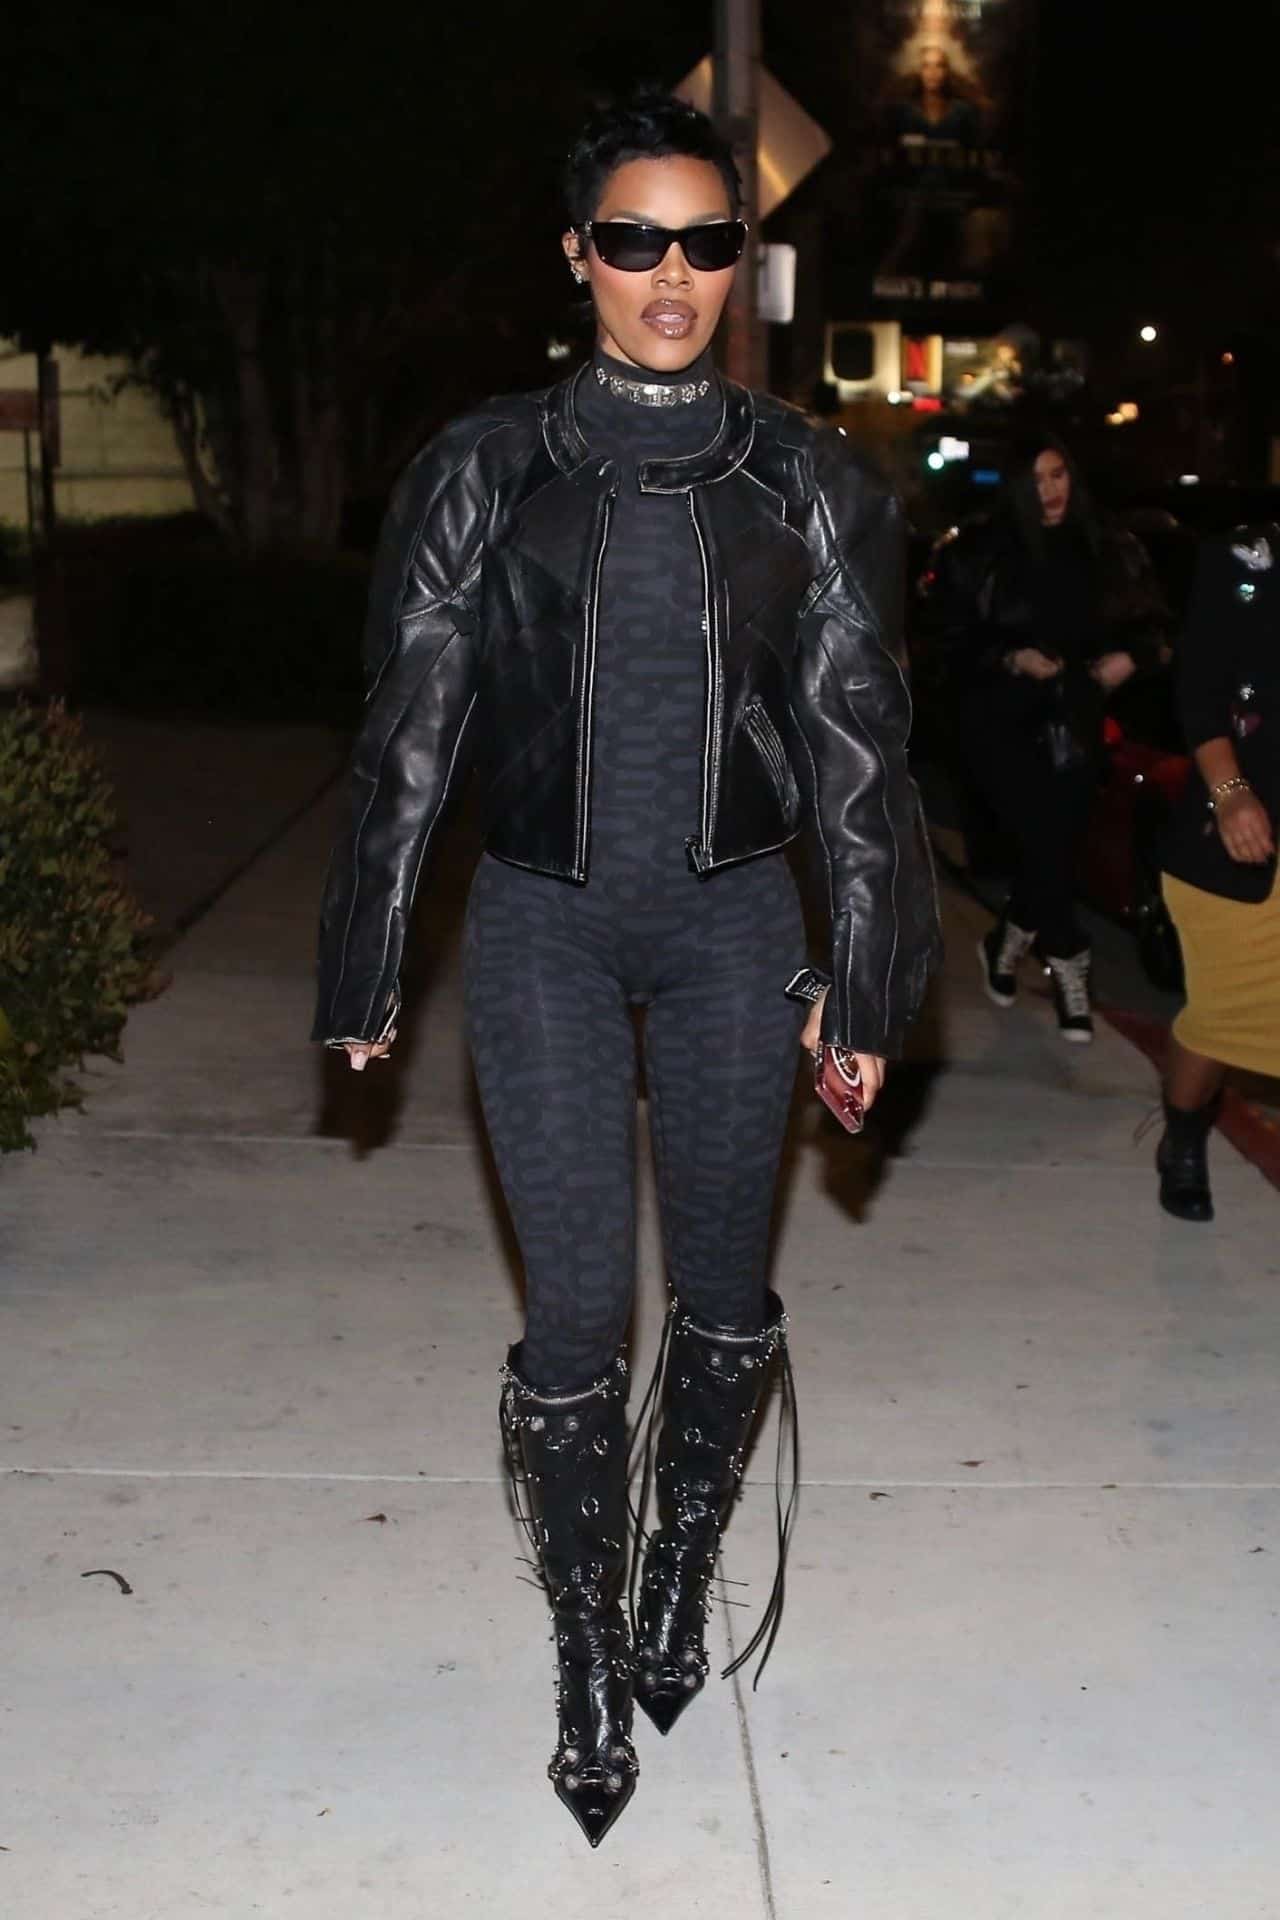 teyana taylor captivates birdstreet club with her unapologetic brilliance and style 4